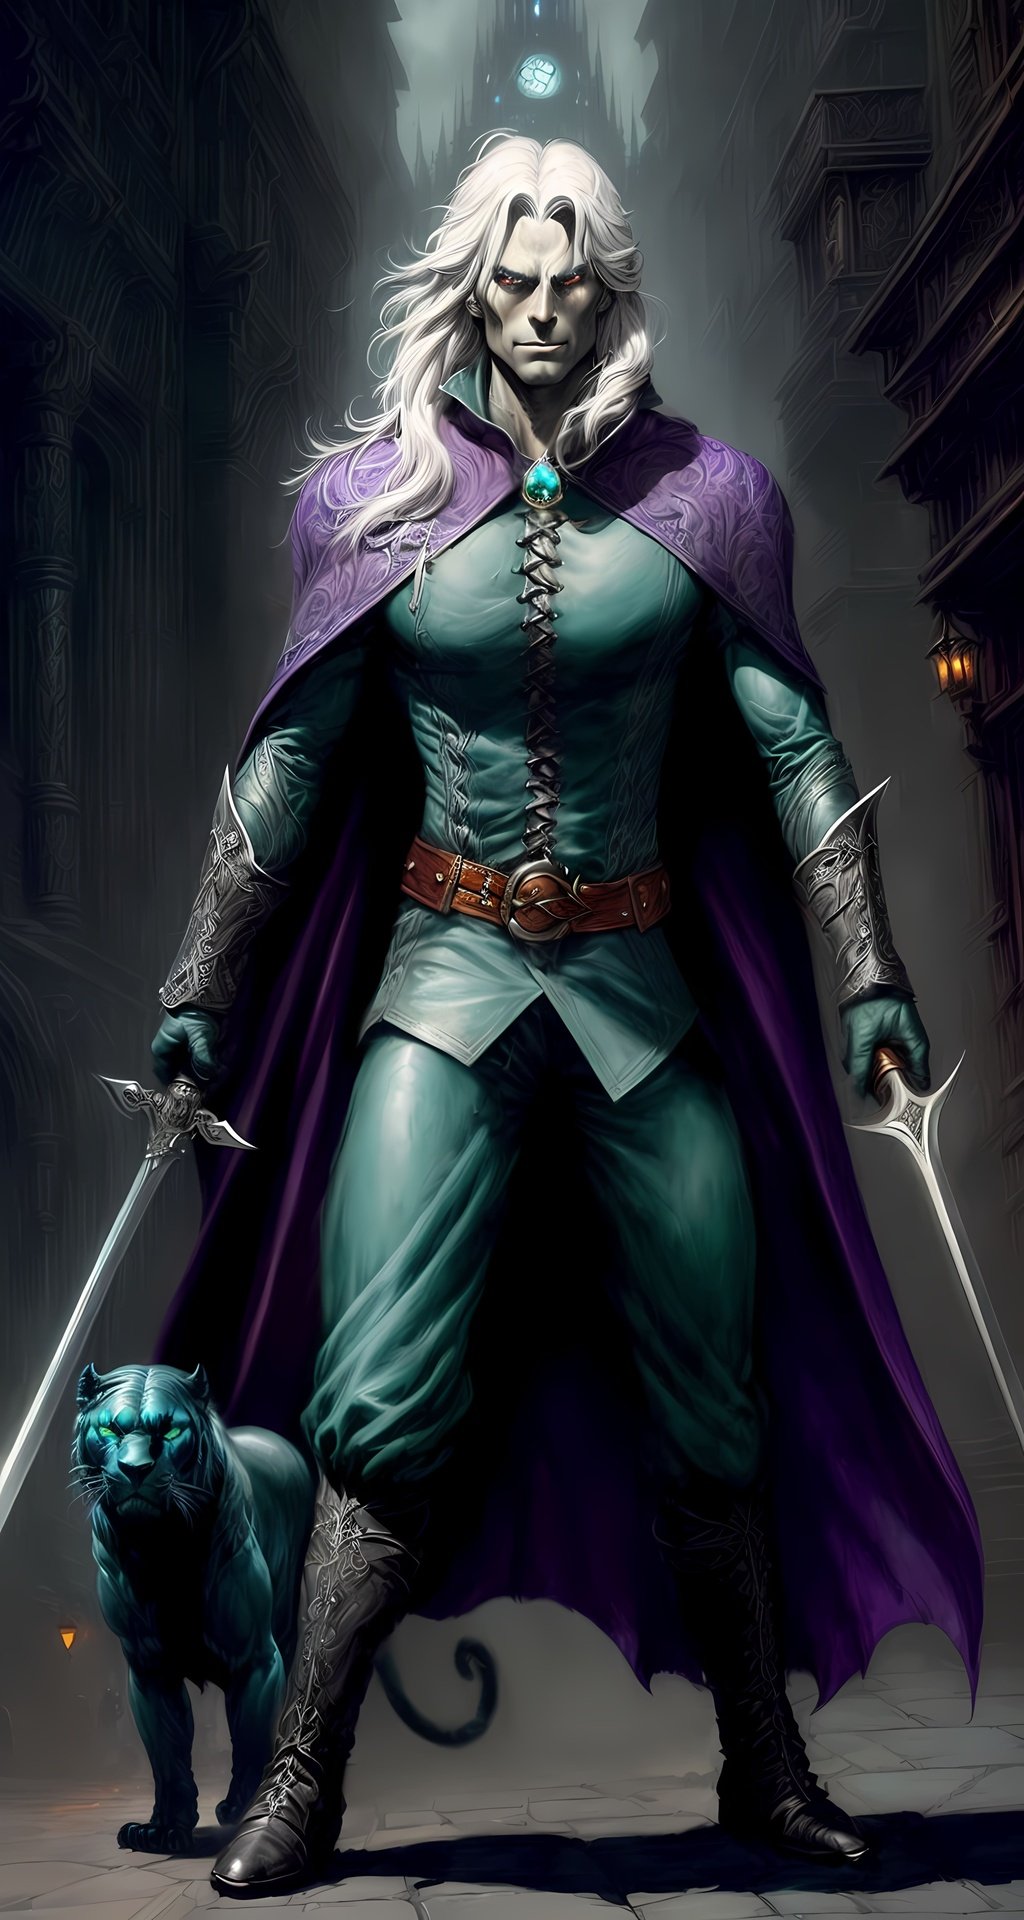 Prompt: ((high-quality)) ((high-detail)) ((highly-detailed)) ((exquisite)) ((detail)), ((photorealistic)), ((Striking)), ((Stunning)), ((breathtaking)) ((dramatic)) ((masterpiece)), close-up (((grey Drow skin) and white hair)) (((Drow))) ((character concept art)) ((Drizzt Do'Urden)) with a (green cloak) in a (((duel-wielding scimitars swords) Twinkle and Icingdeath)), ((on the streets)) of the ((city of Neverwinter)), ((by Jesper Ejsing)), ((by Jeff Easley)), ((by Frank Frazetta)), ((by Larry Elmore)), attractive Drow ((ranger dnd character portrait)), Handsome, slender, toned, sharp features, ((dark skin)), ((long white hair)), (((leather armor))), (earth tones), R. A. Salvatore book cover art, symmetrical outfit, matching outfit, Pinterest cosplay.